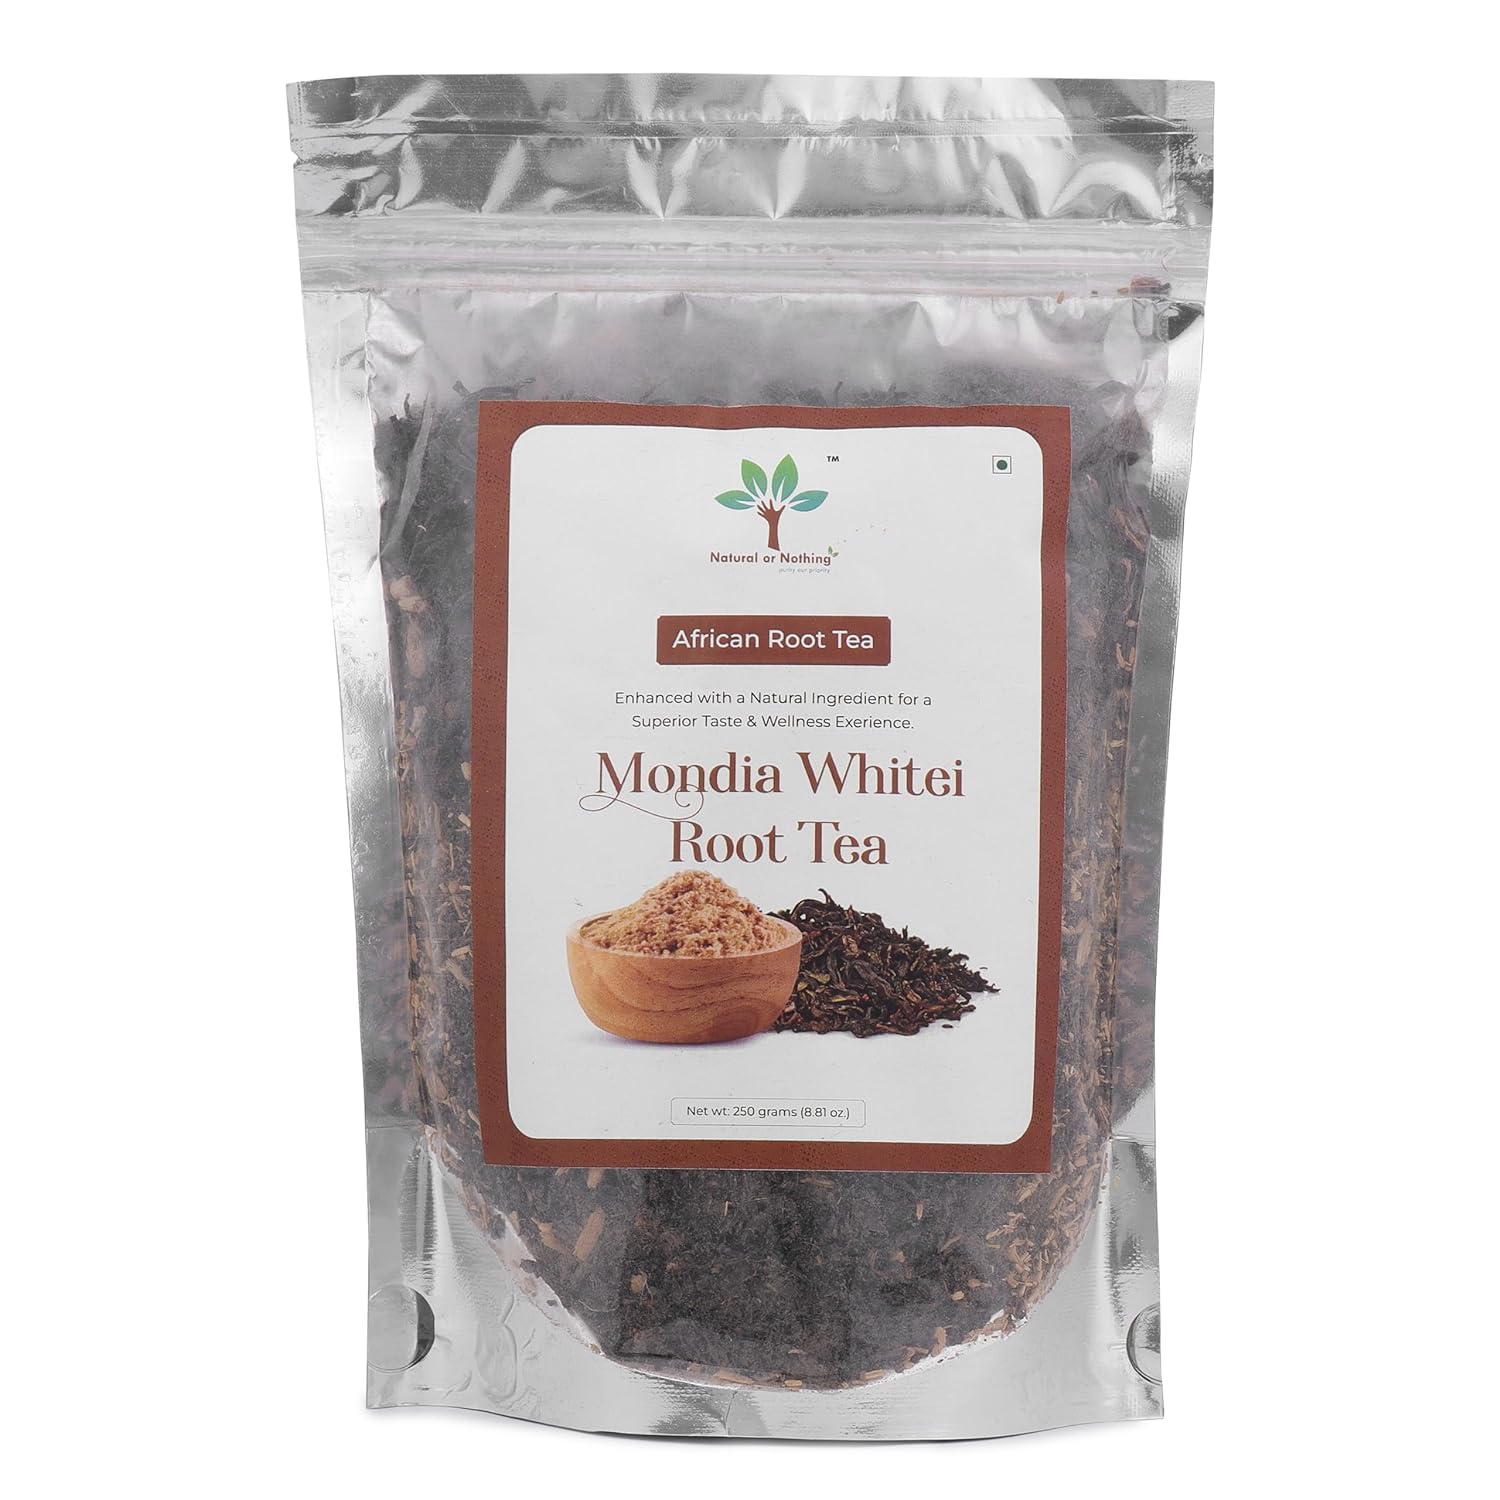 Natural or Nothing | African Root Tea | Mondia Whitei Root Tea | with Black Tea Leaves (250g)